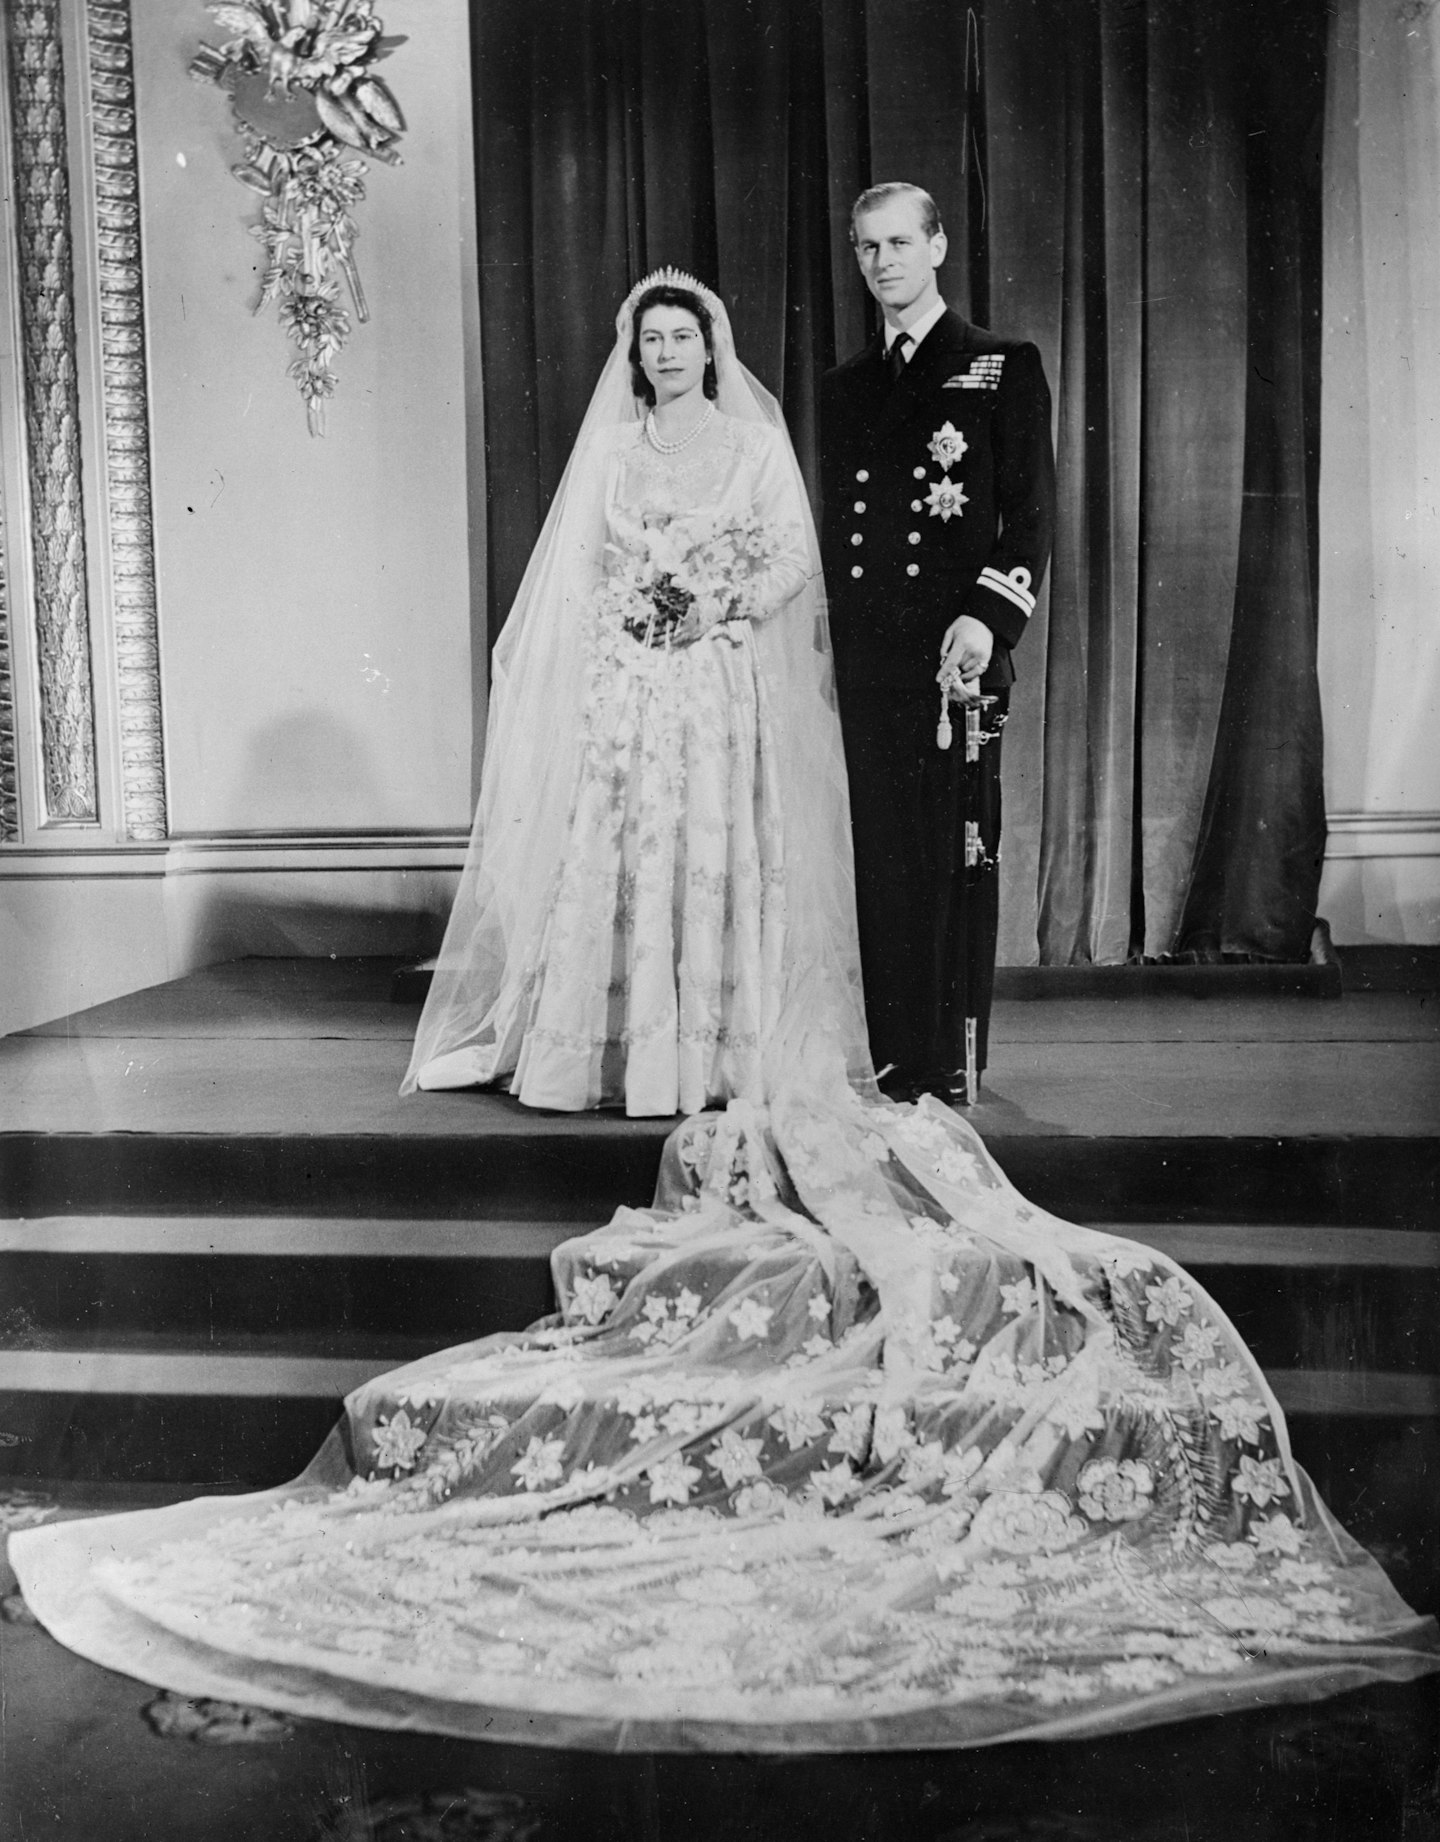 The Queen and Duke's wedding day